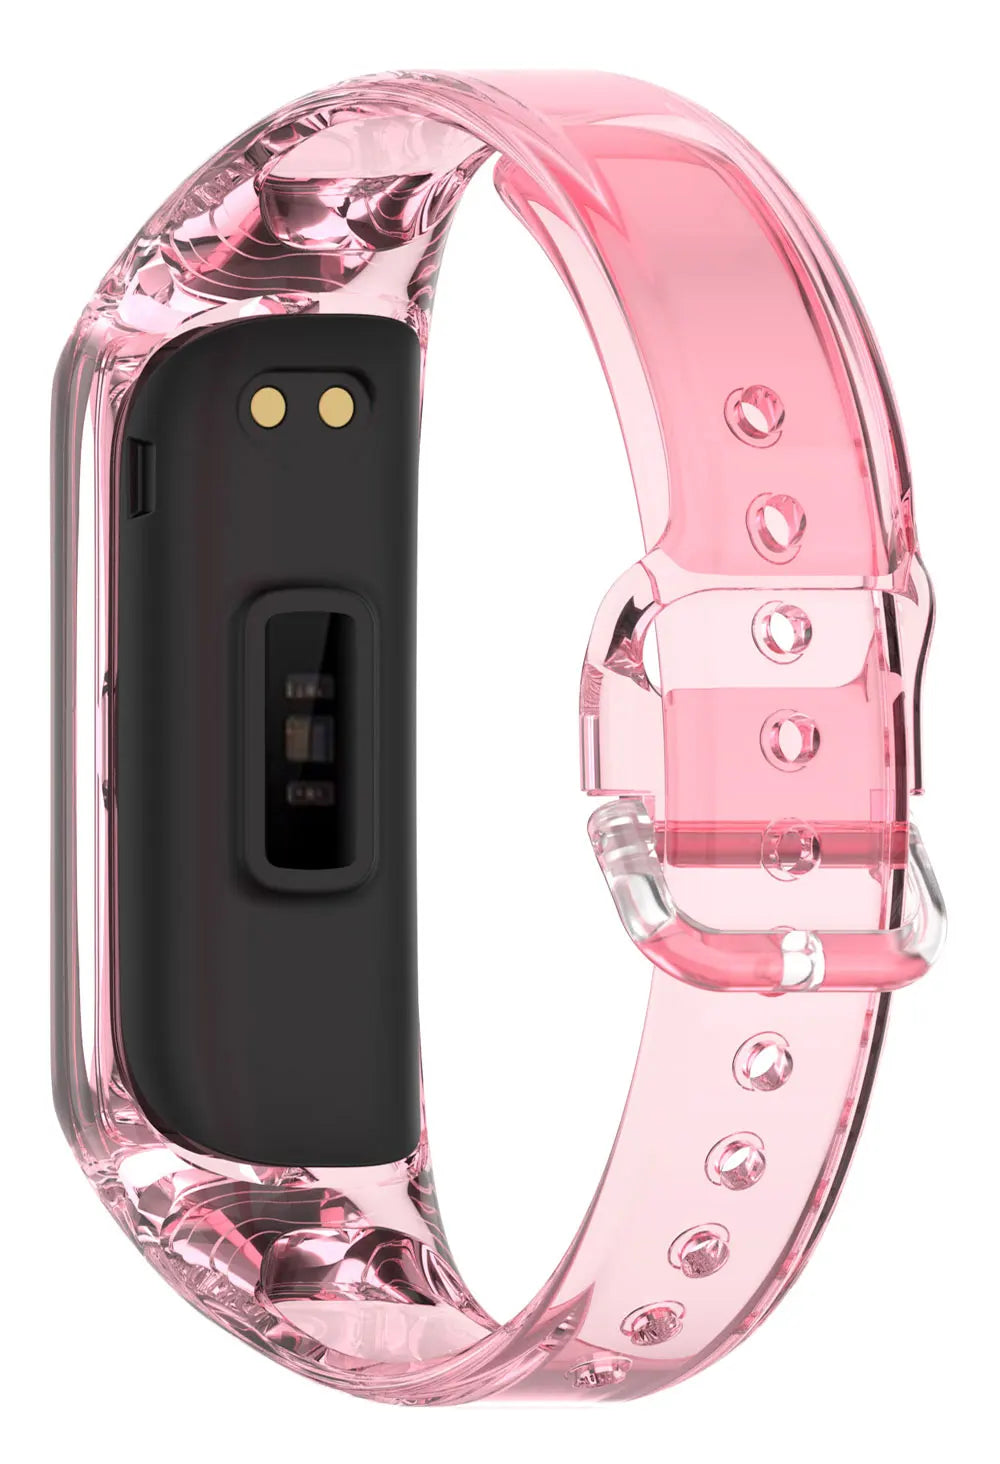 Transparent TPU Band For Samsung Galaxy Fit 2 SM-R220 Strap Discoloration In Light Bracelet For Galaxy Fit 2 SM-R220 Watchband